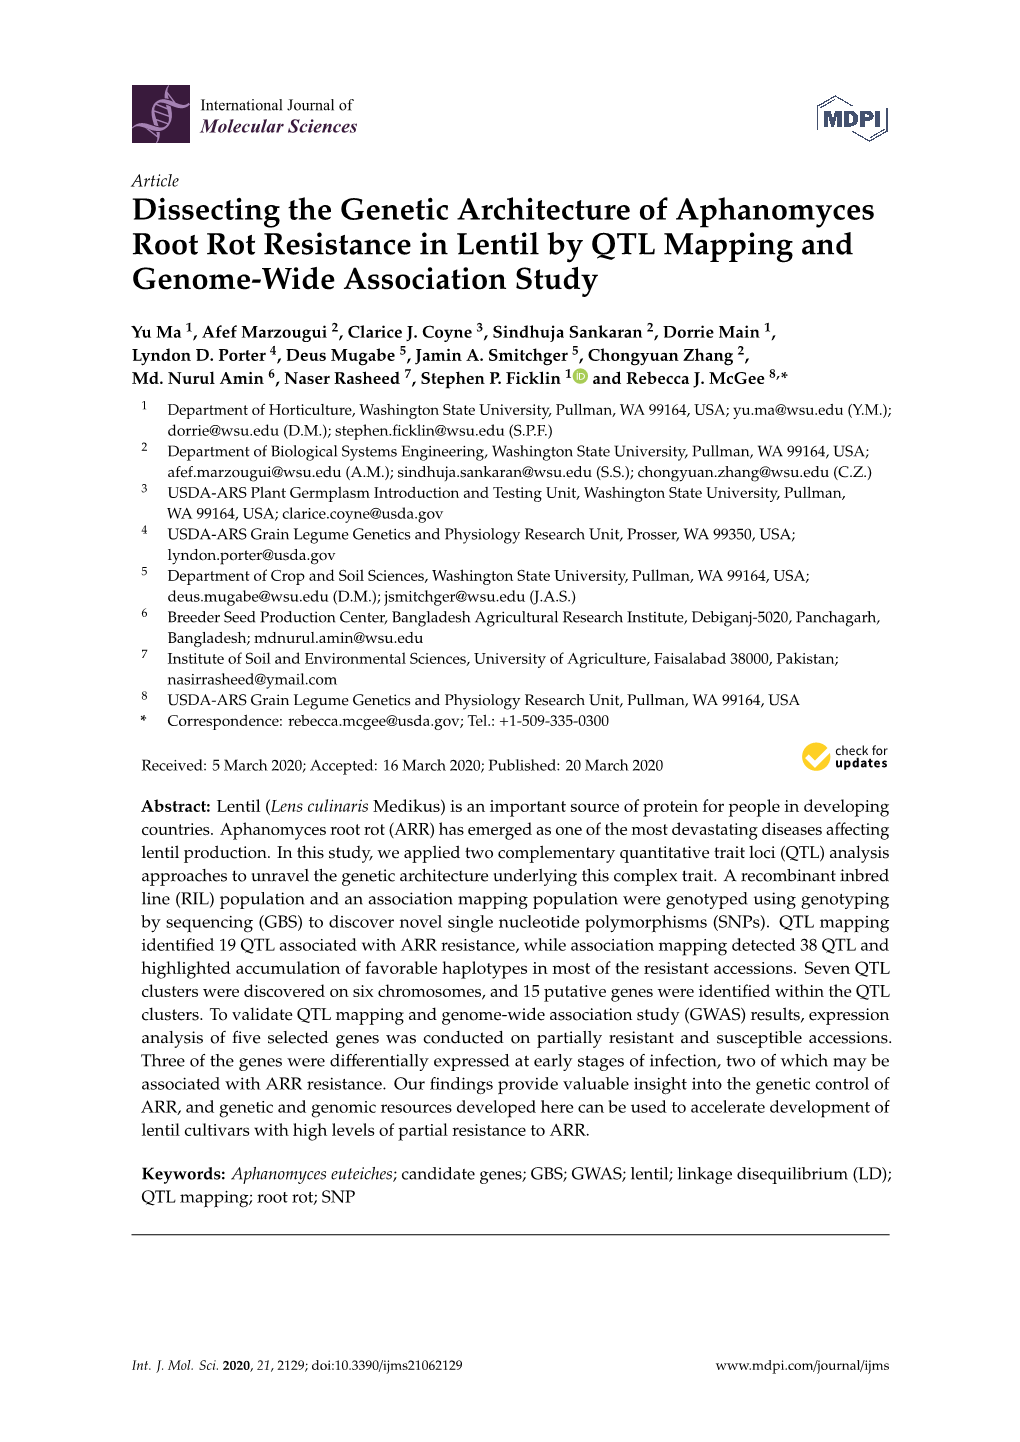 Dissecting the Genetic Architecture of Aphanomyces Root Rot Resistance in Lentil by QTL Mapping and Genome-Wide Association Study